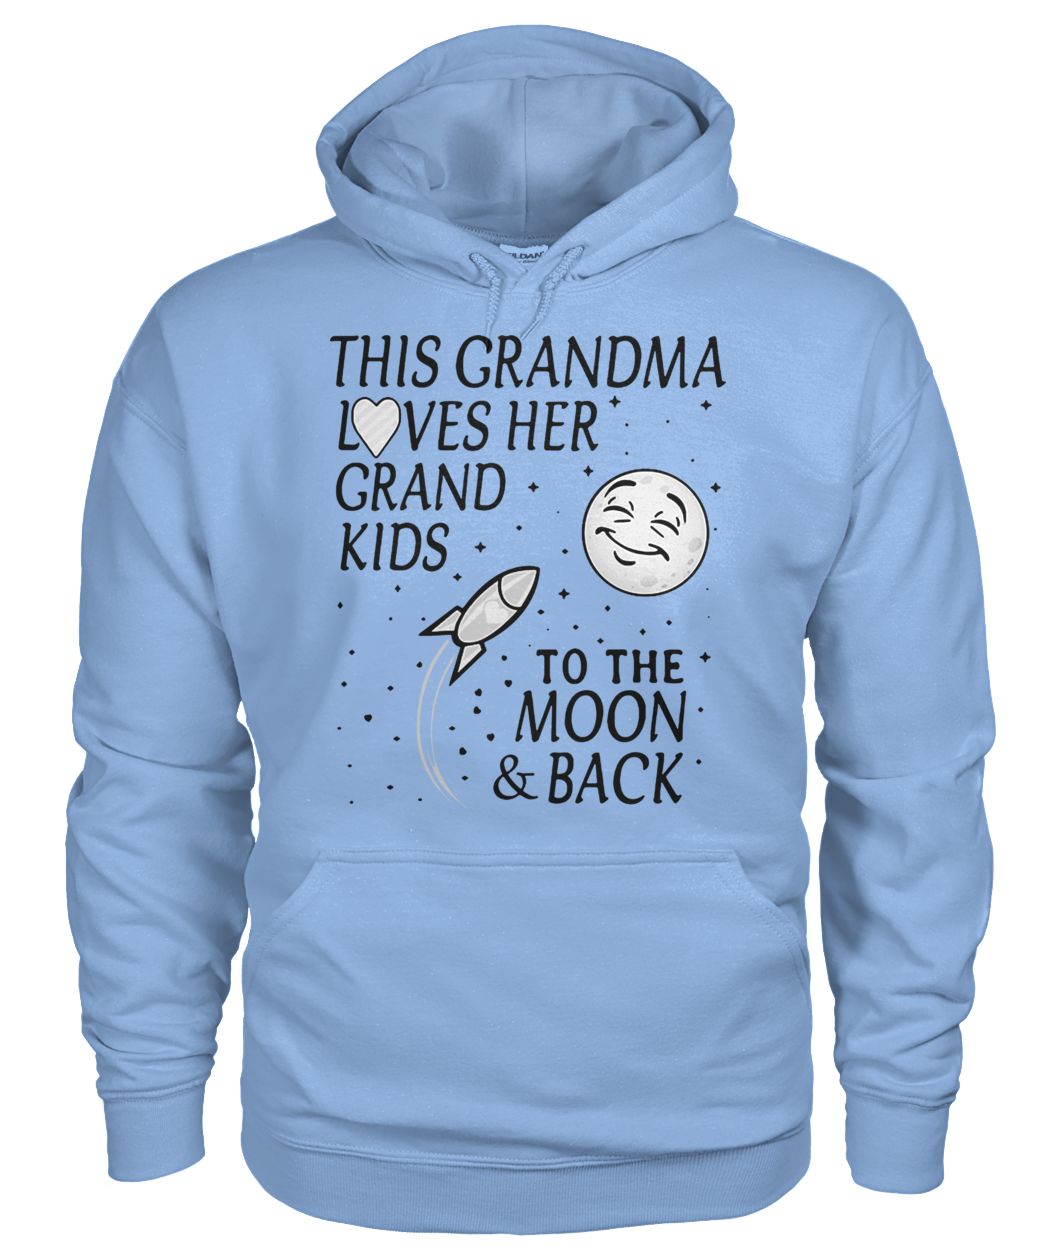 This grandma loves her grandkids to the moon and back gildan hoodie